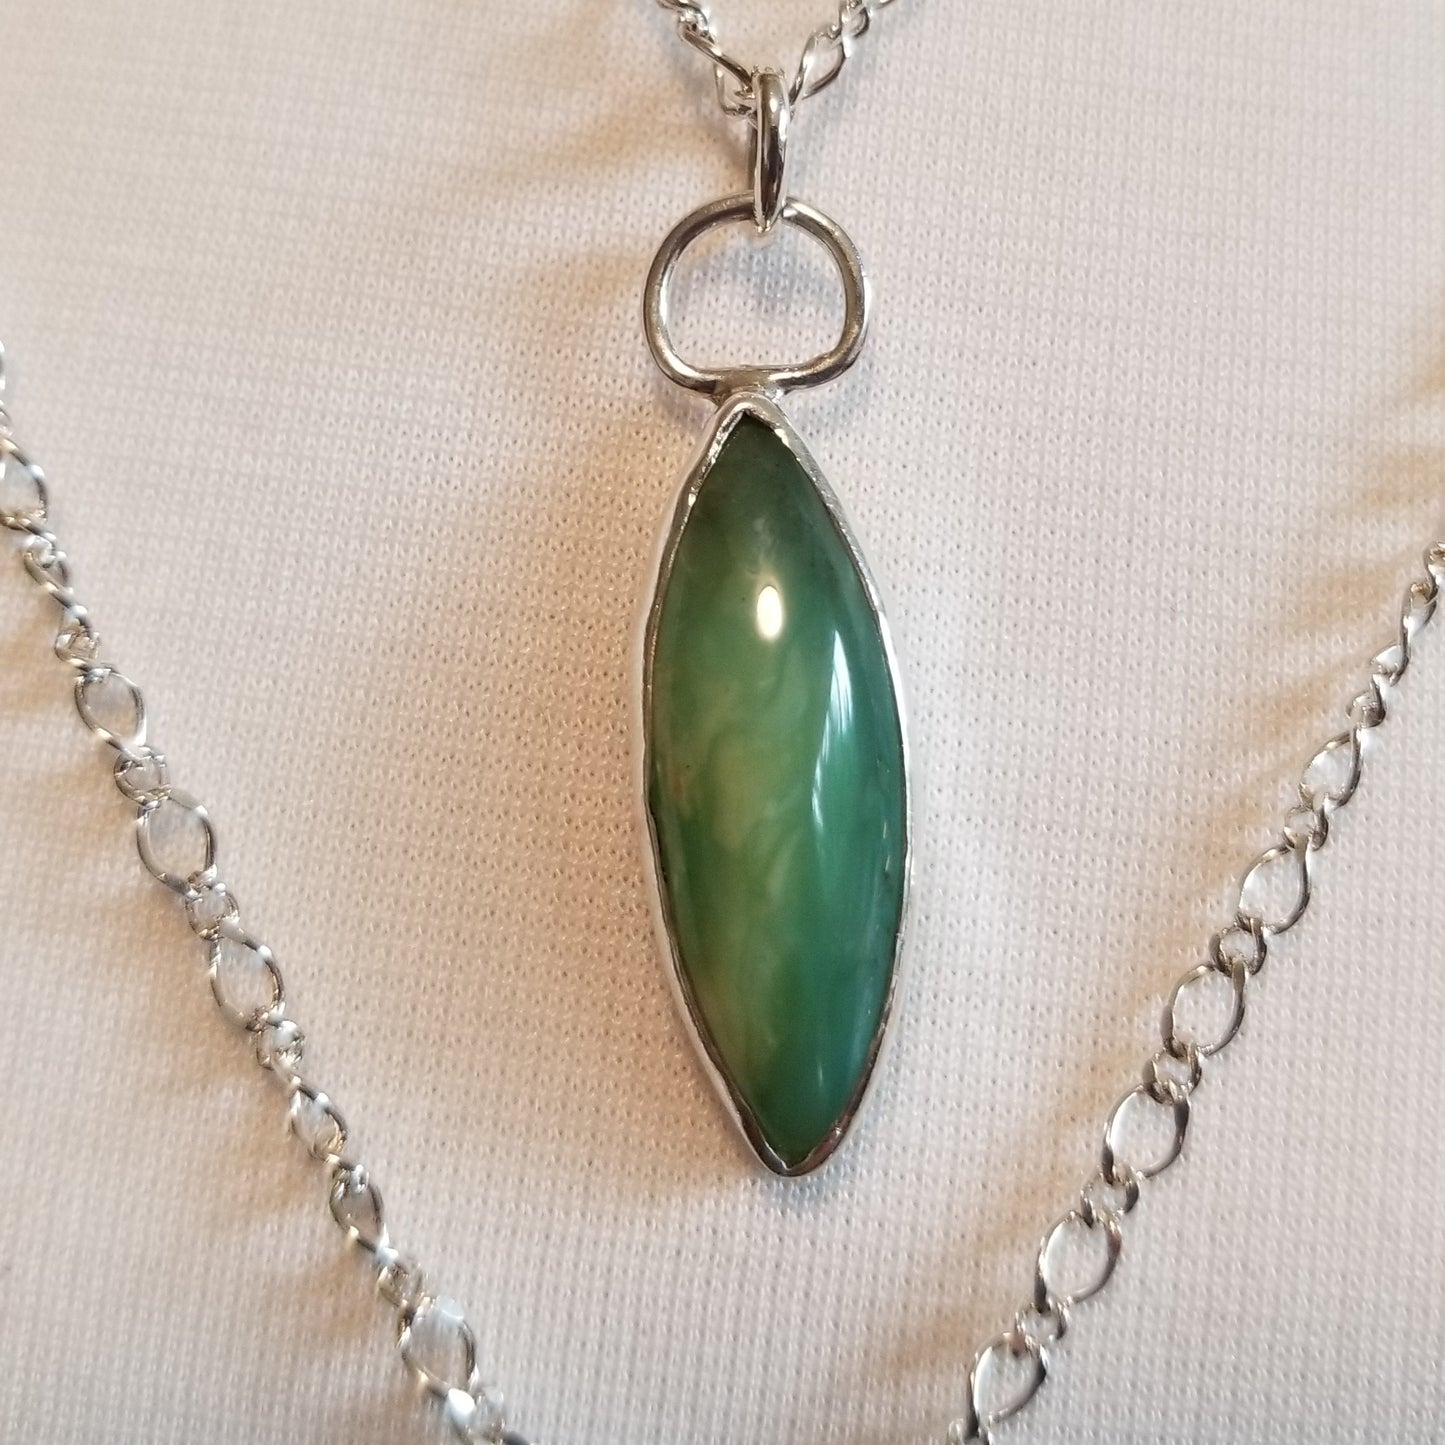 Triple Strand Silver Necklace with Silver and Prehnite Pendants